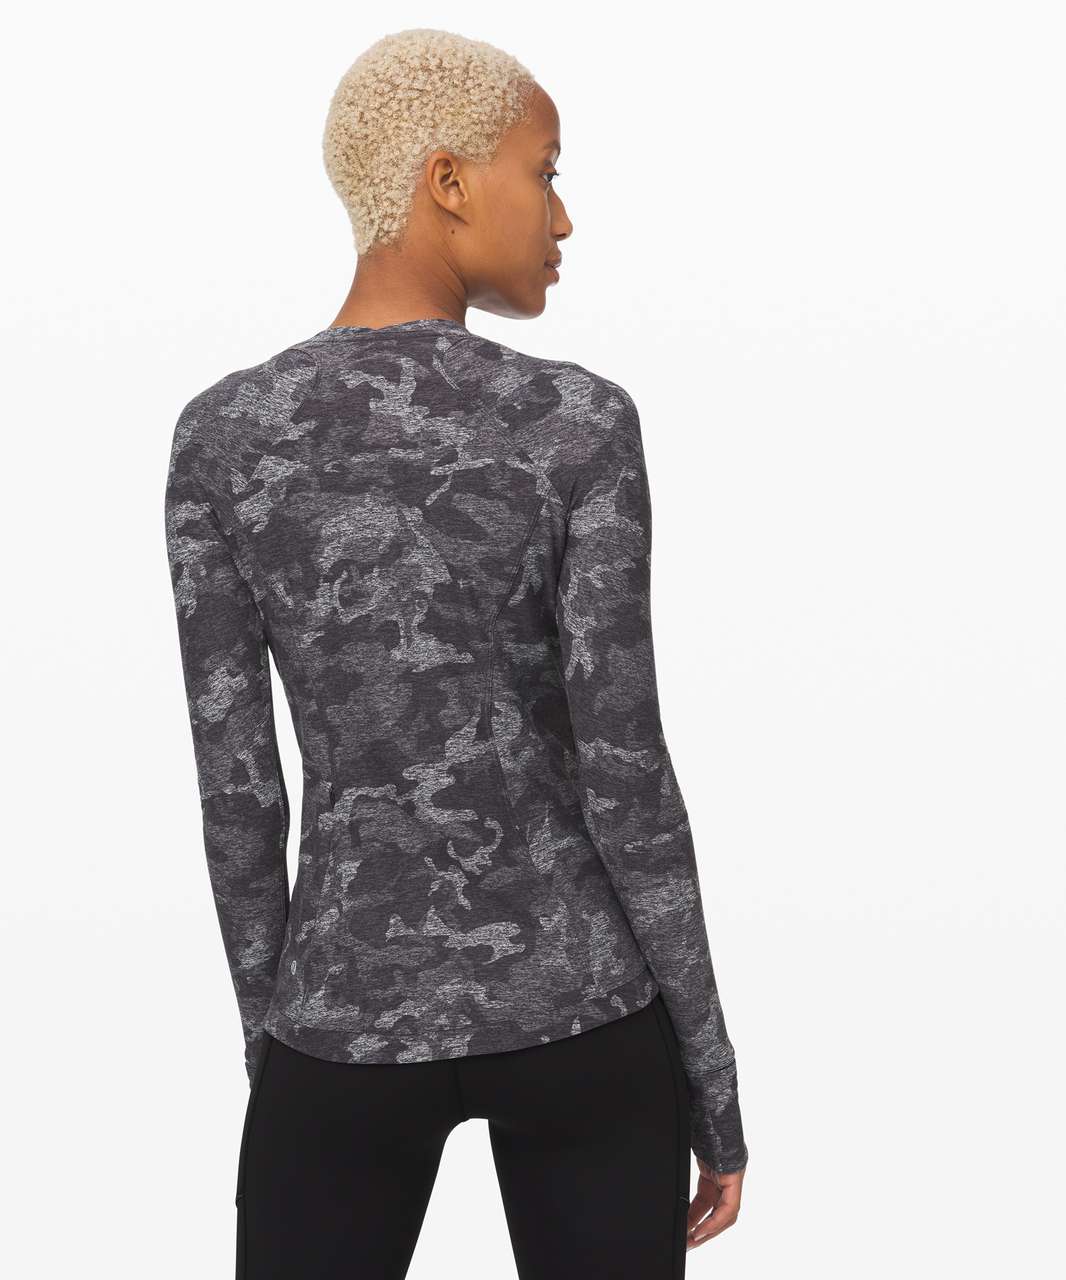 Lululemon Long Distance Short Sleeve Incognito Camo SSL Silver Drop Alpine  4 - $40 (41% Off Retail) - From Stephanie